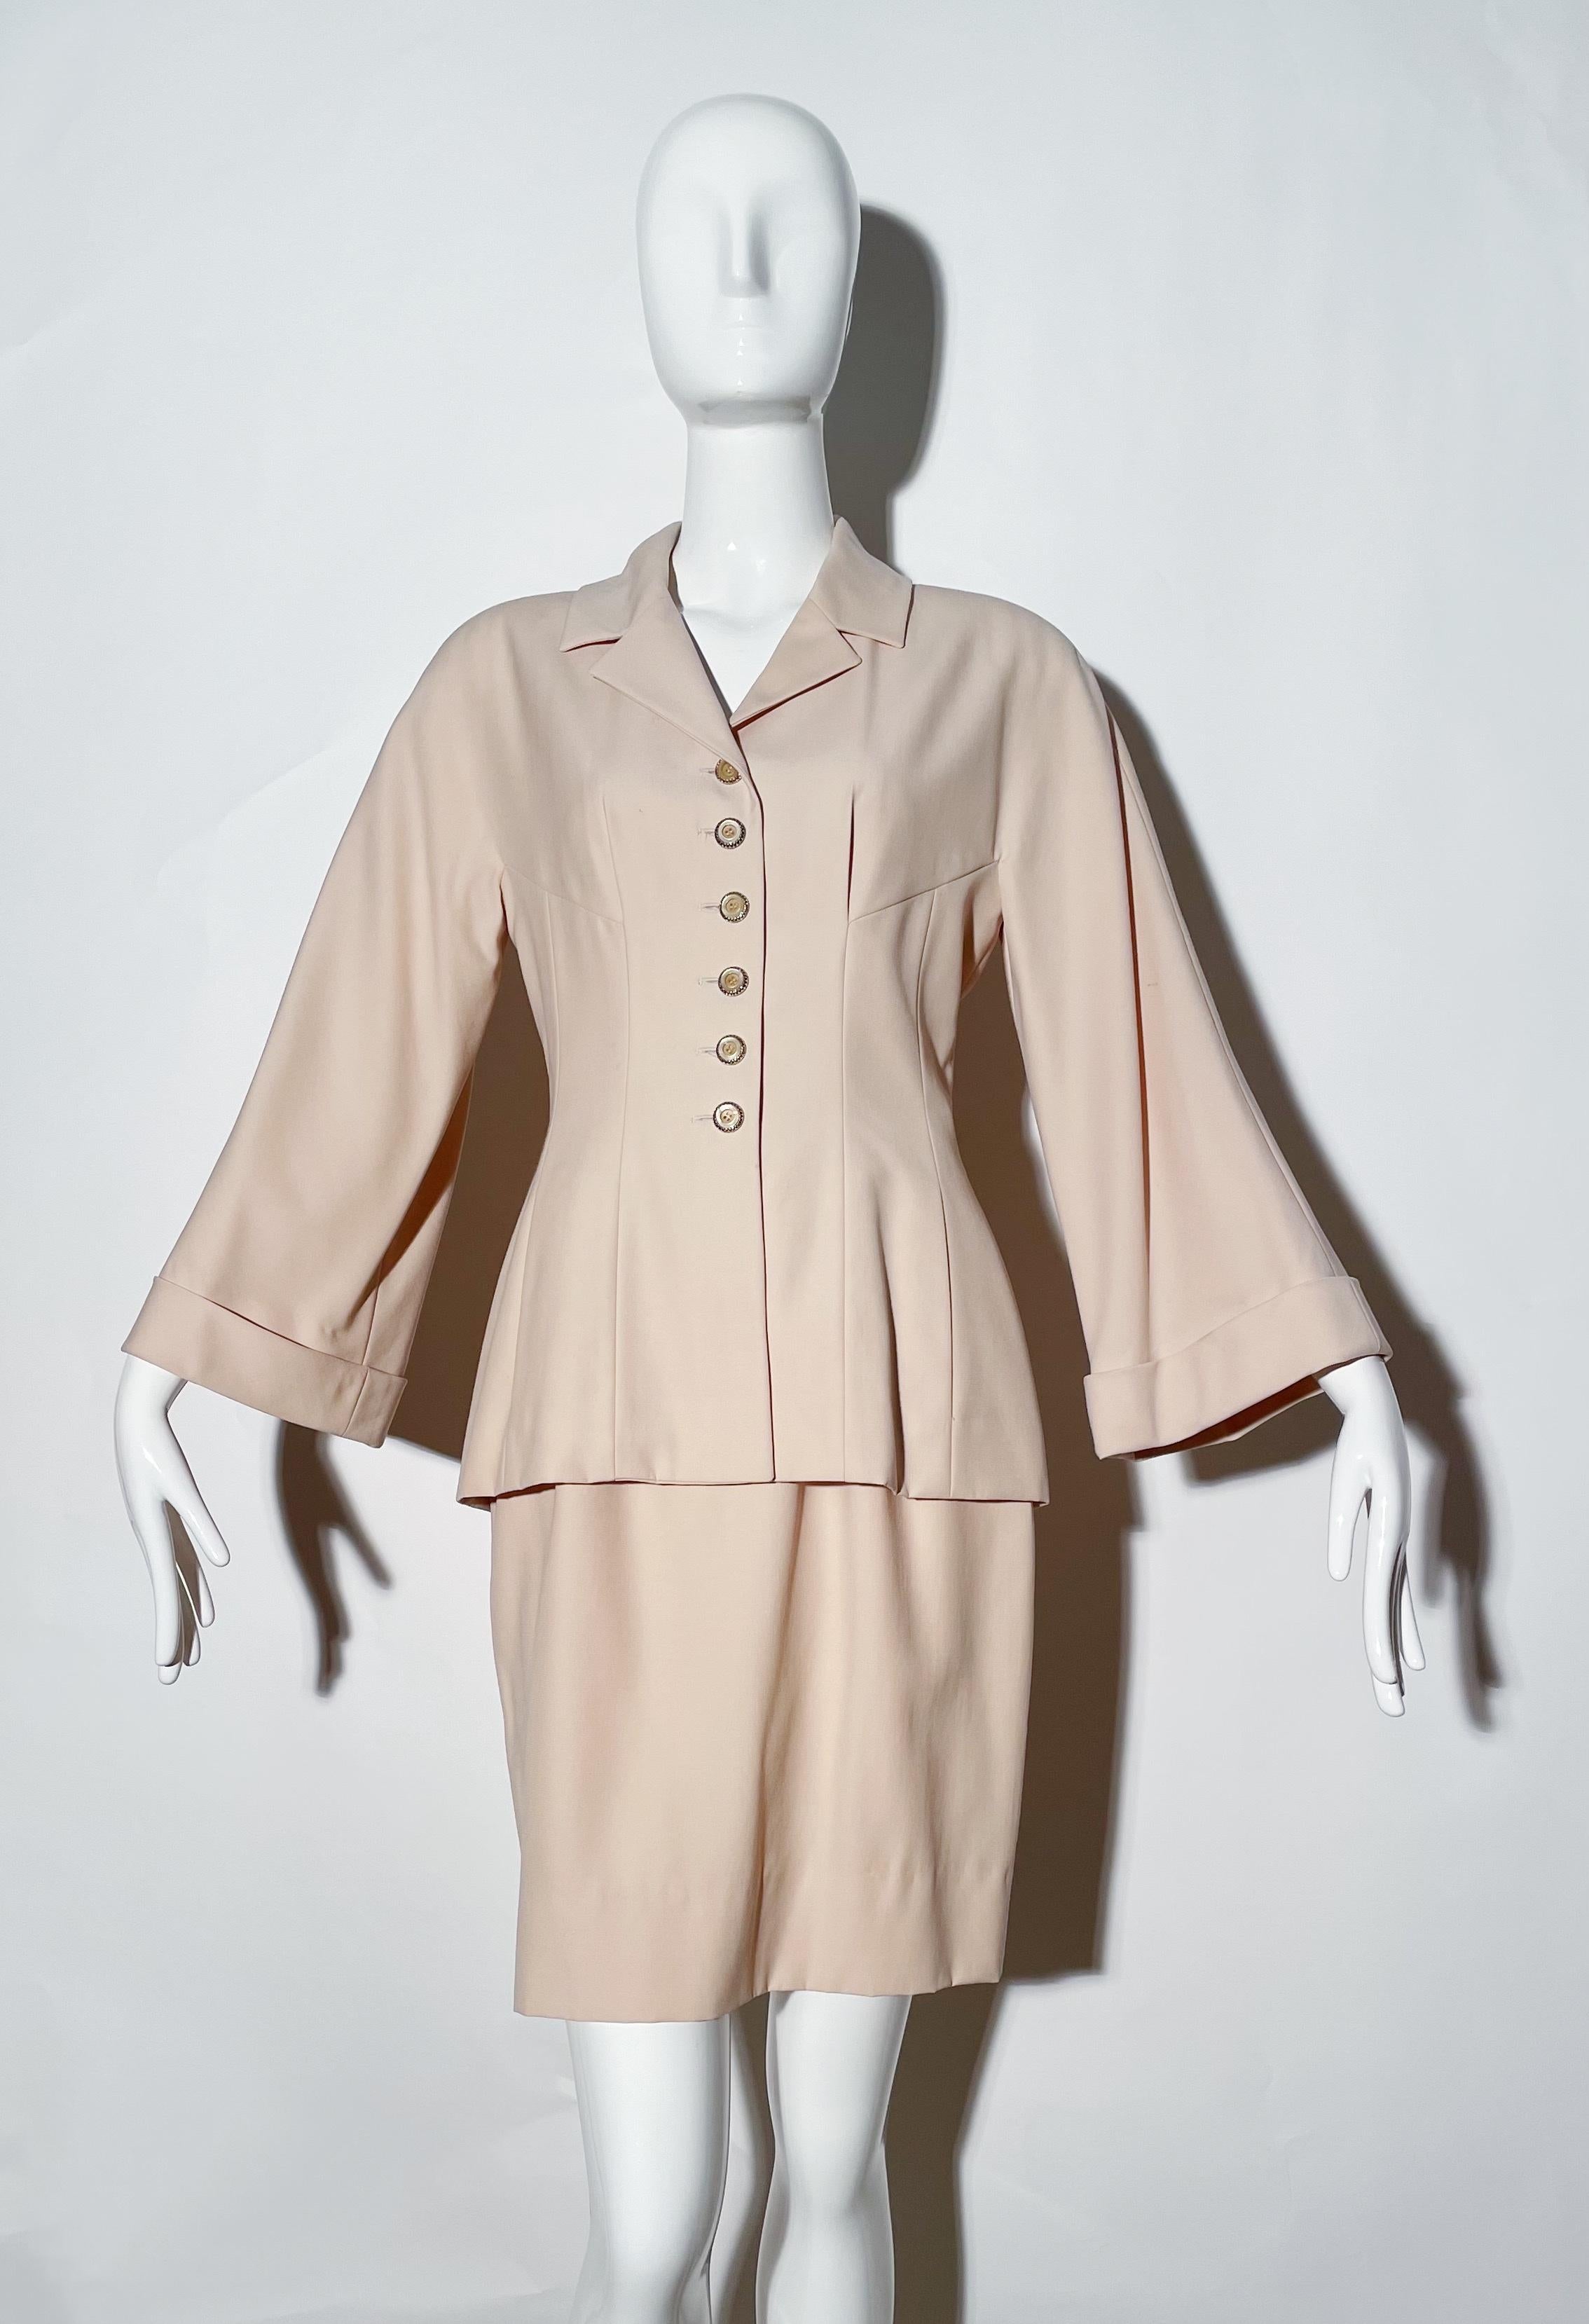 Blushy beige colored skirt suit. Front button closures. Shoulder pads. Collared. Fitted style. Rear zipper on skirt. Lined. Wool. Made in France. 
*Condition: Excellent vintage condition. No visible Flaws.

Measurements Taken Laying Flat